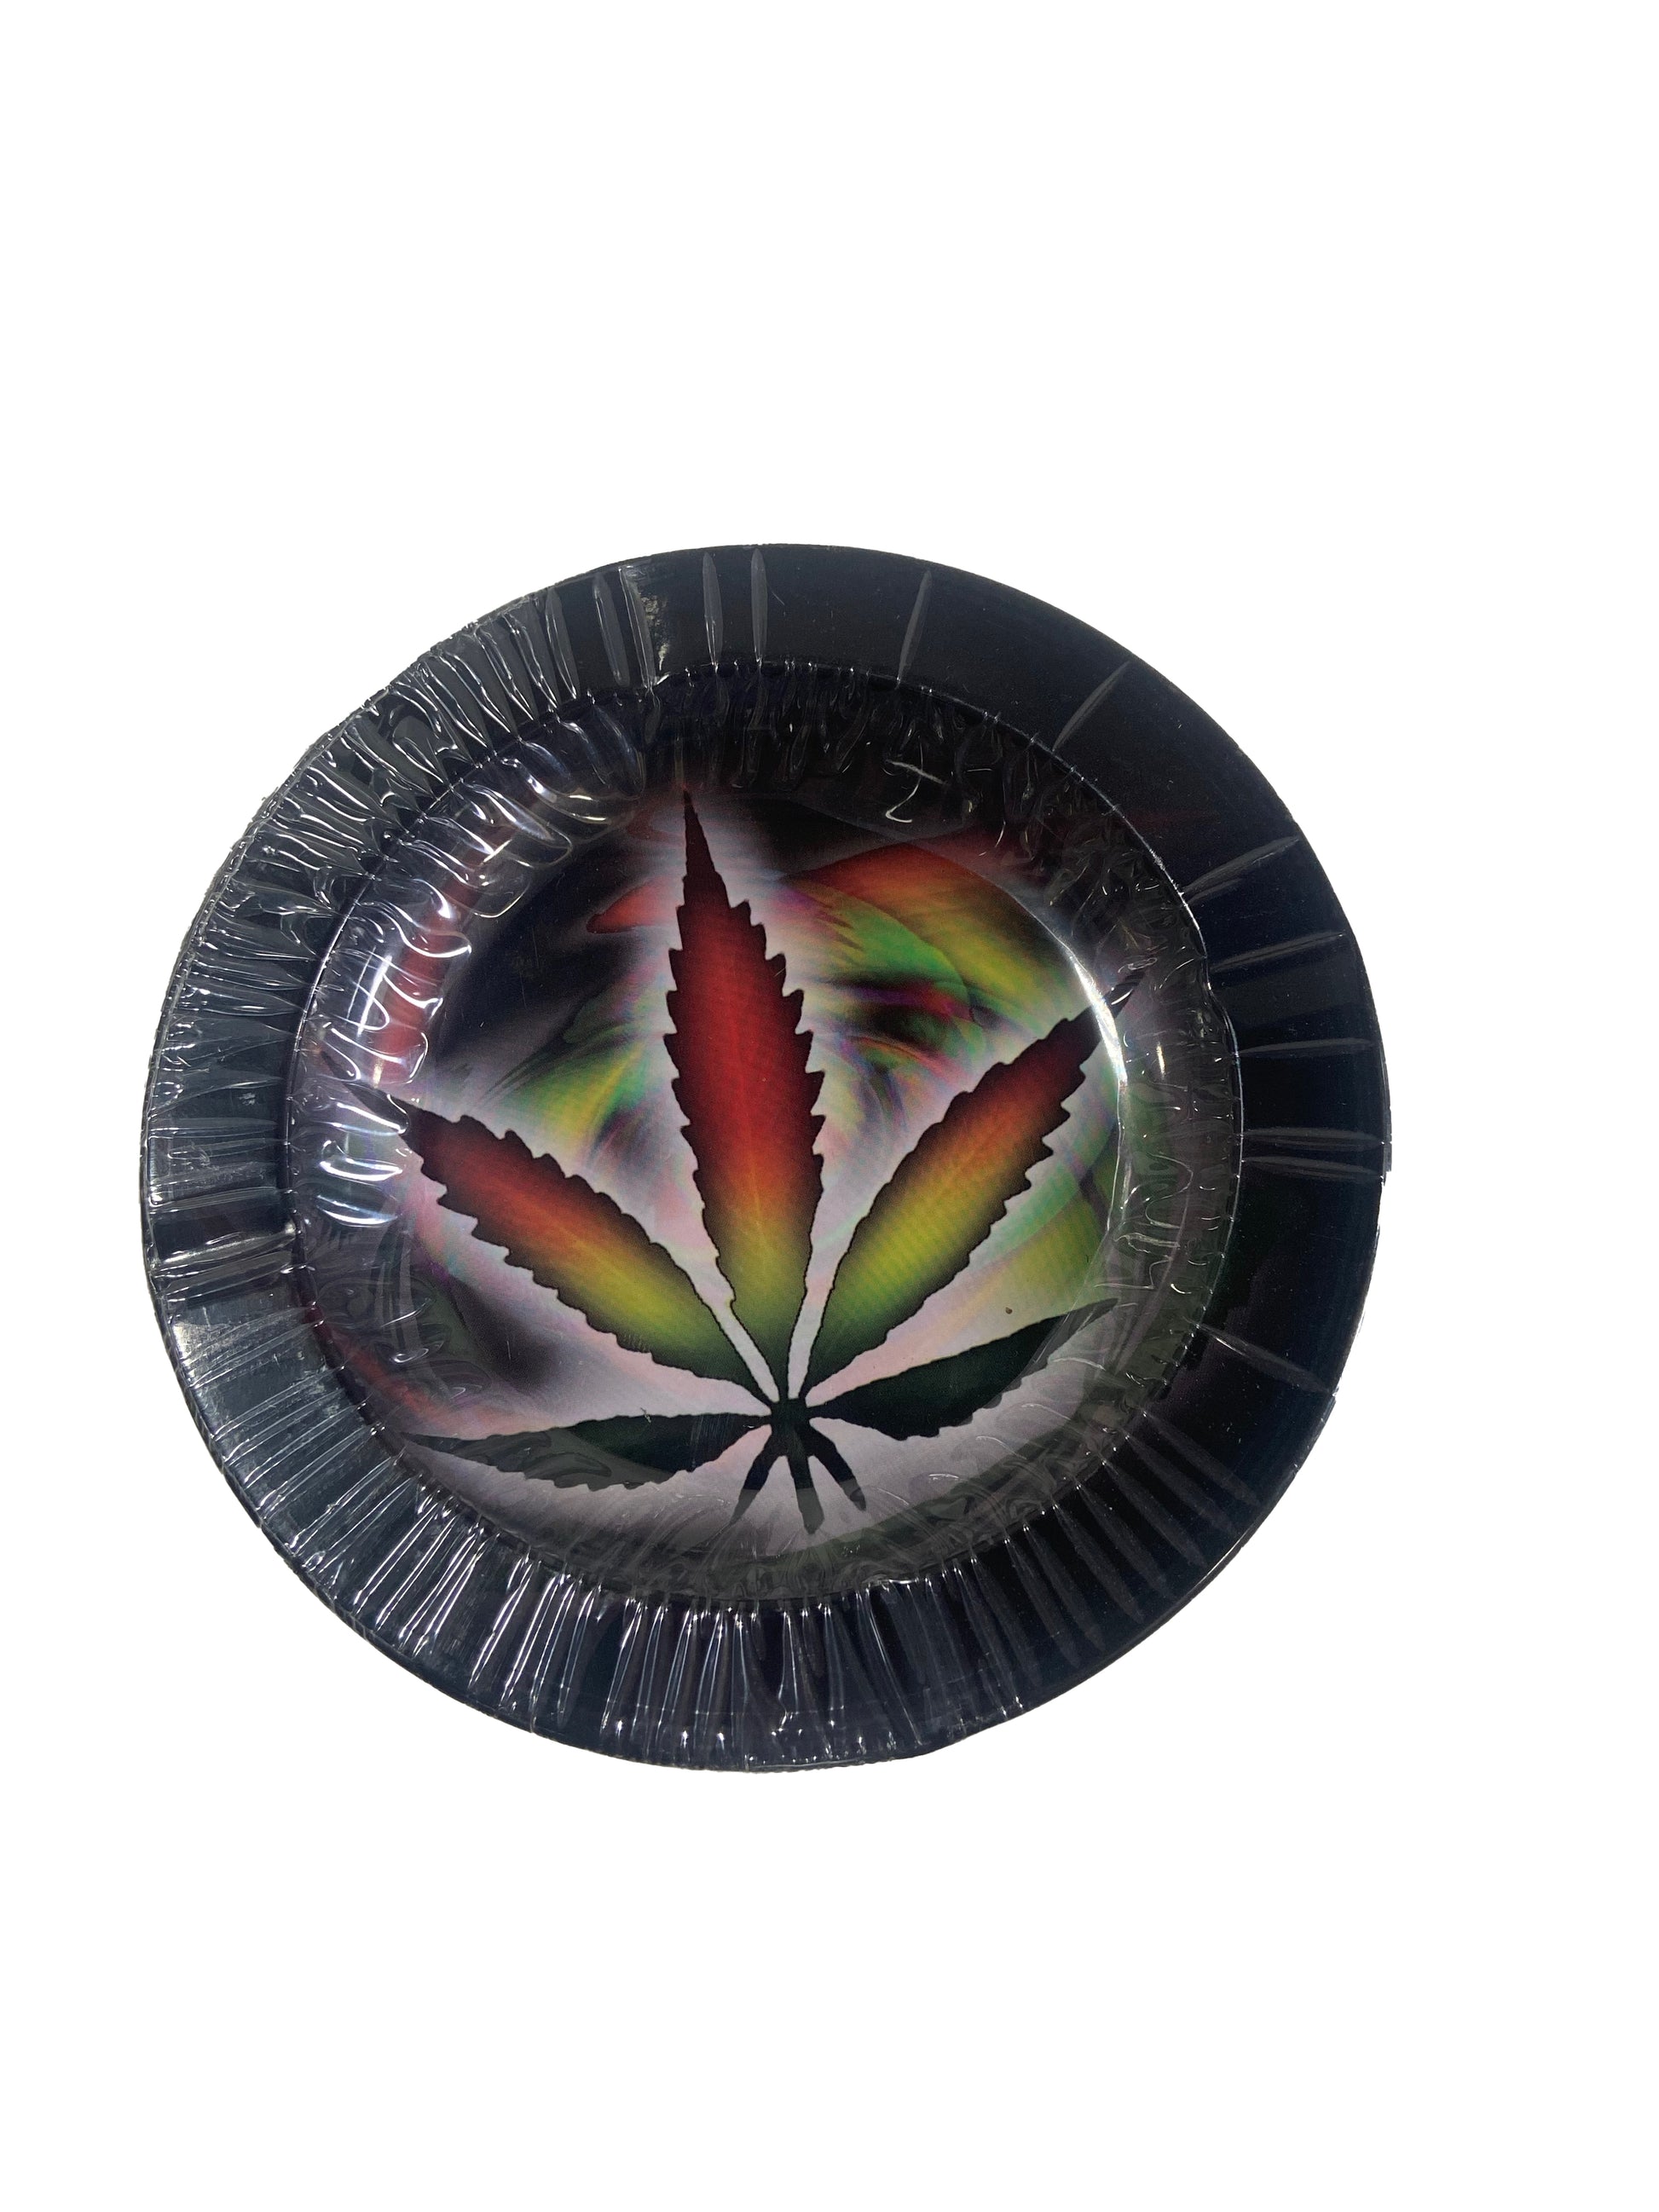 Metal Ashtray with Design